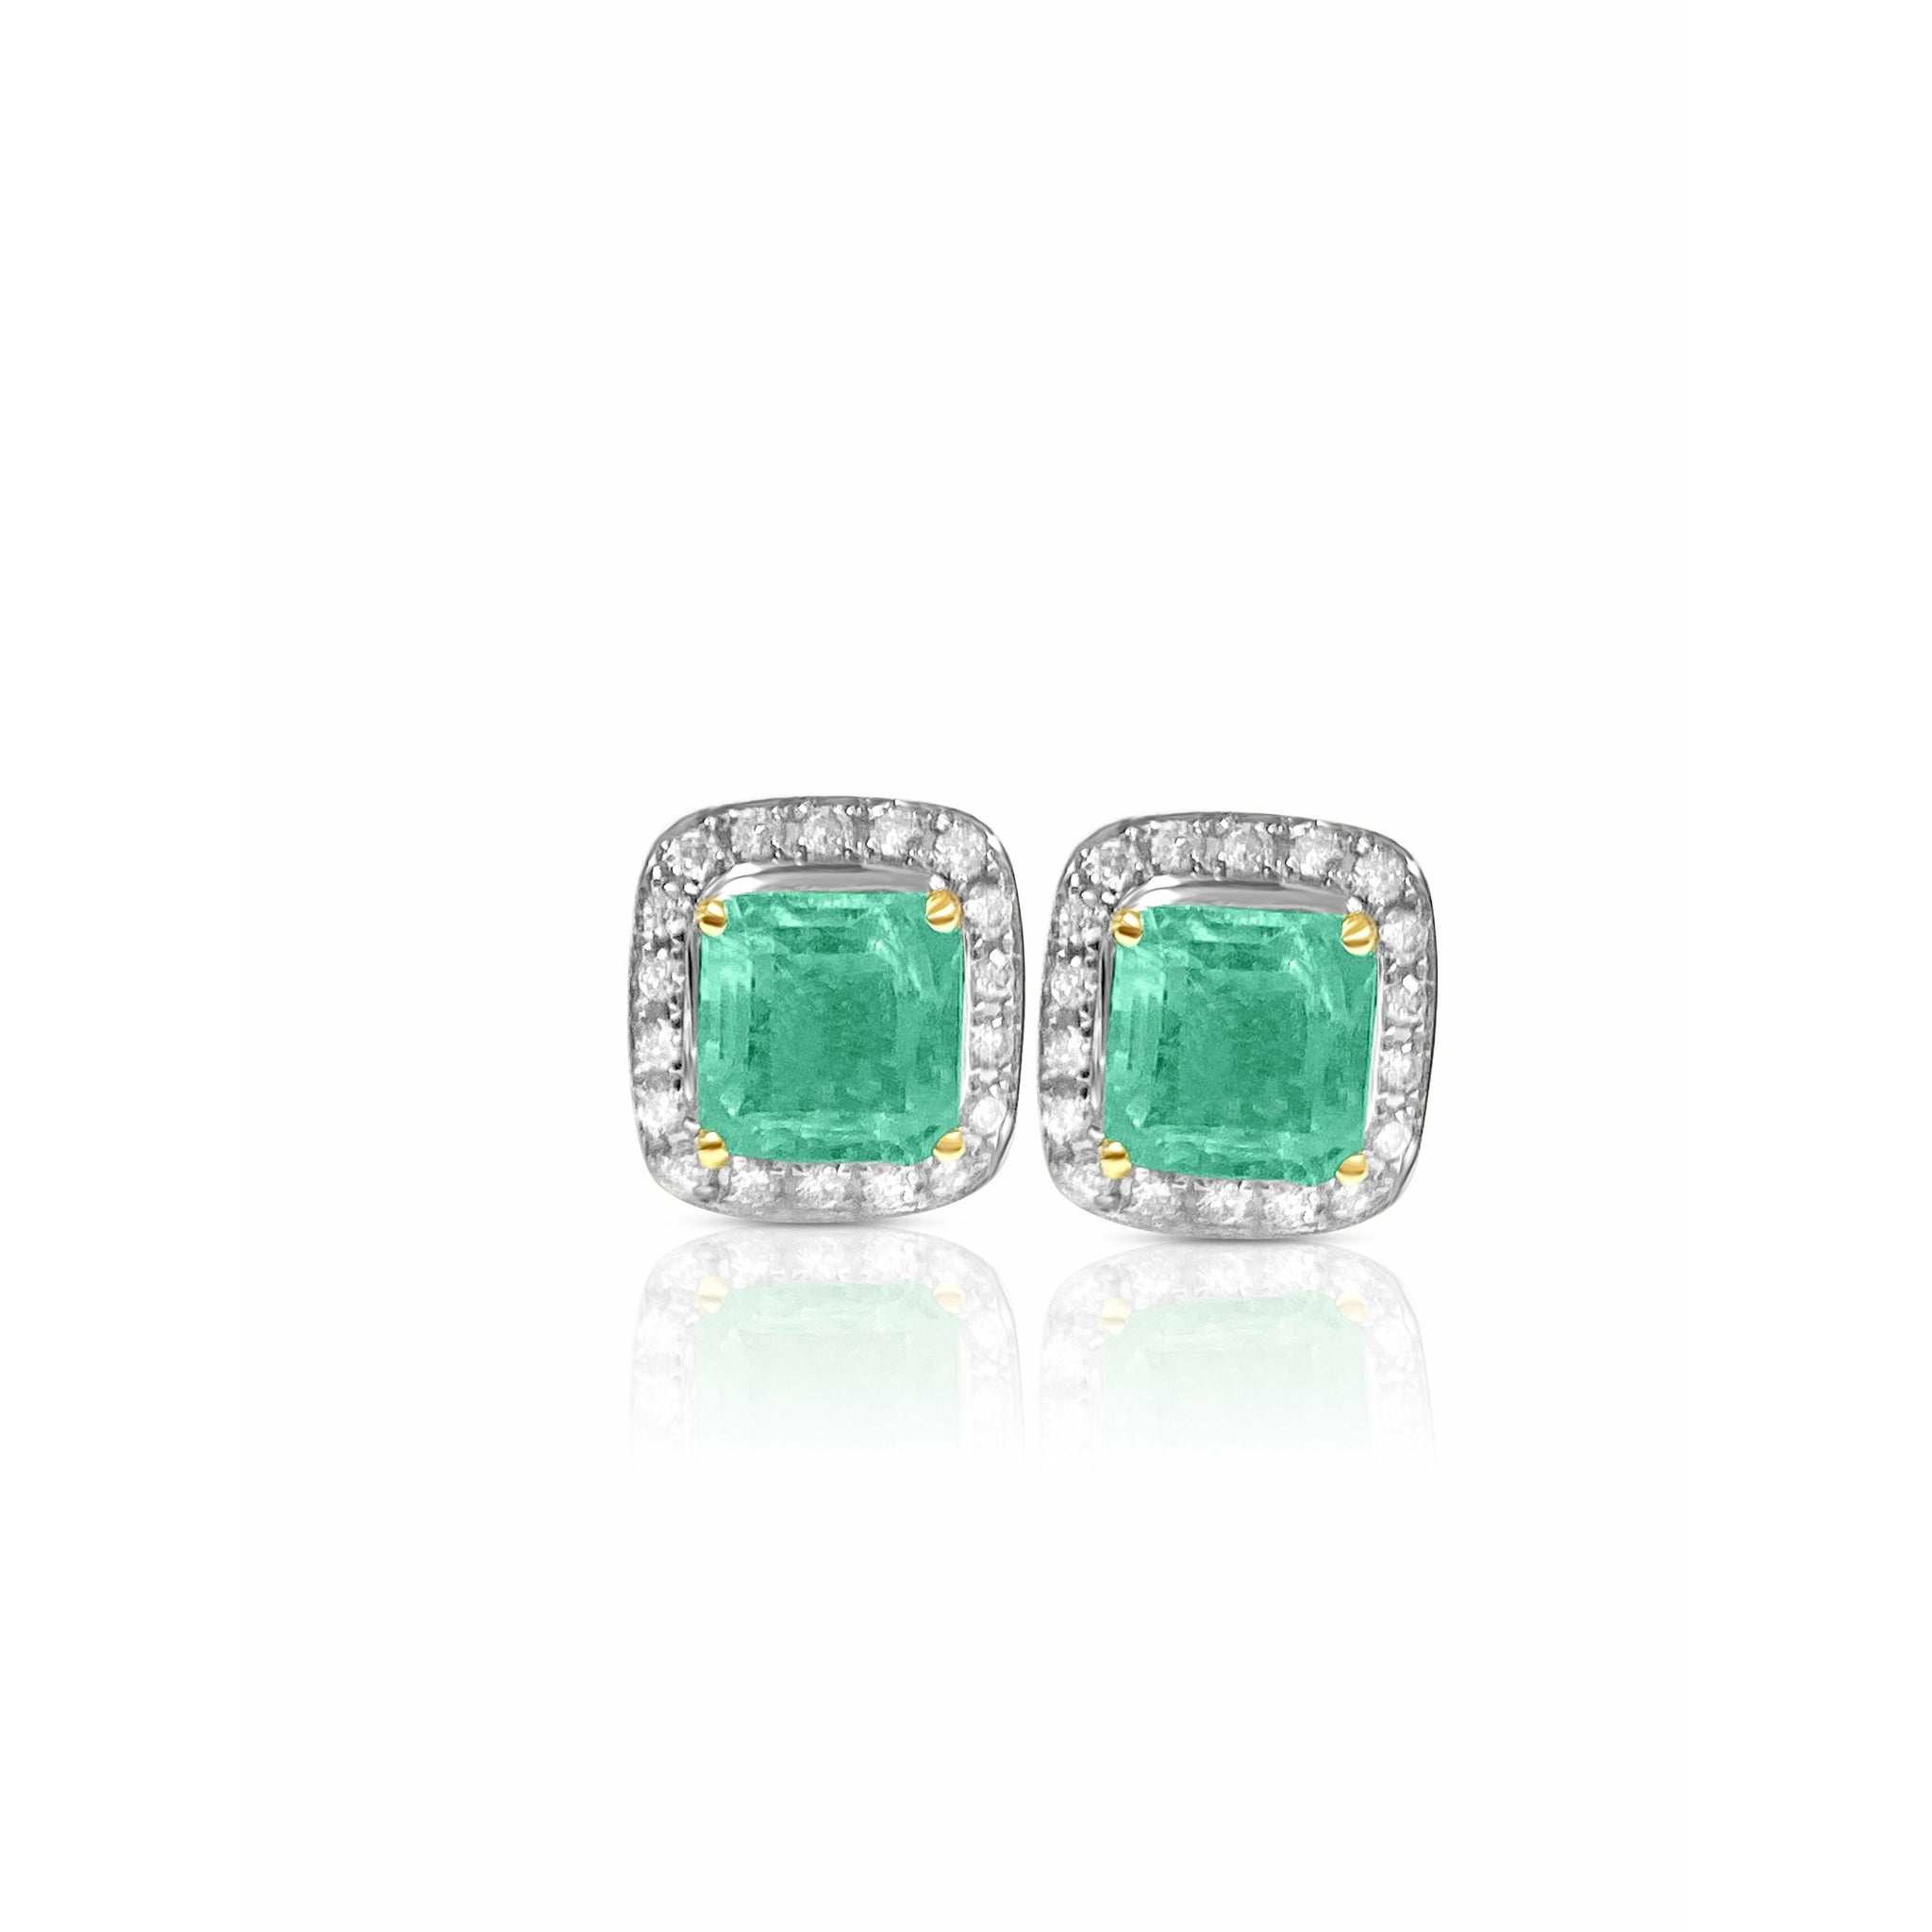 2.08 Carat Natural Emerald Stud Earrings with Diamond Halo in 18k Solid Gold - ASSAY